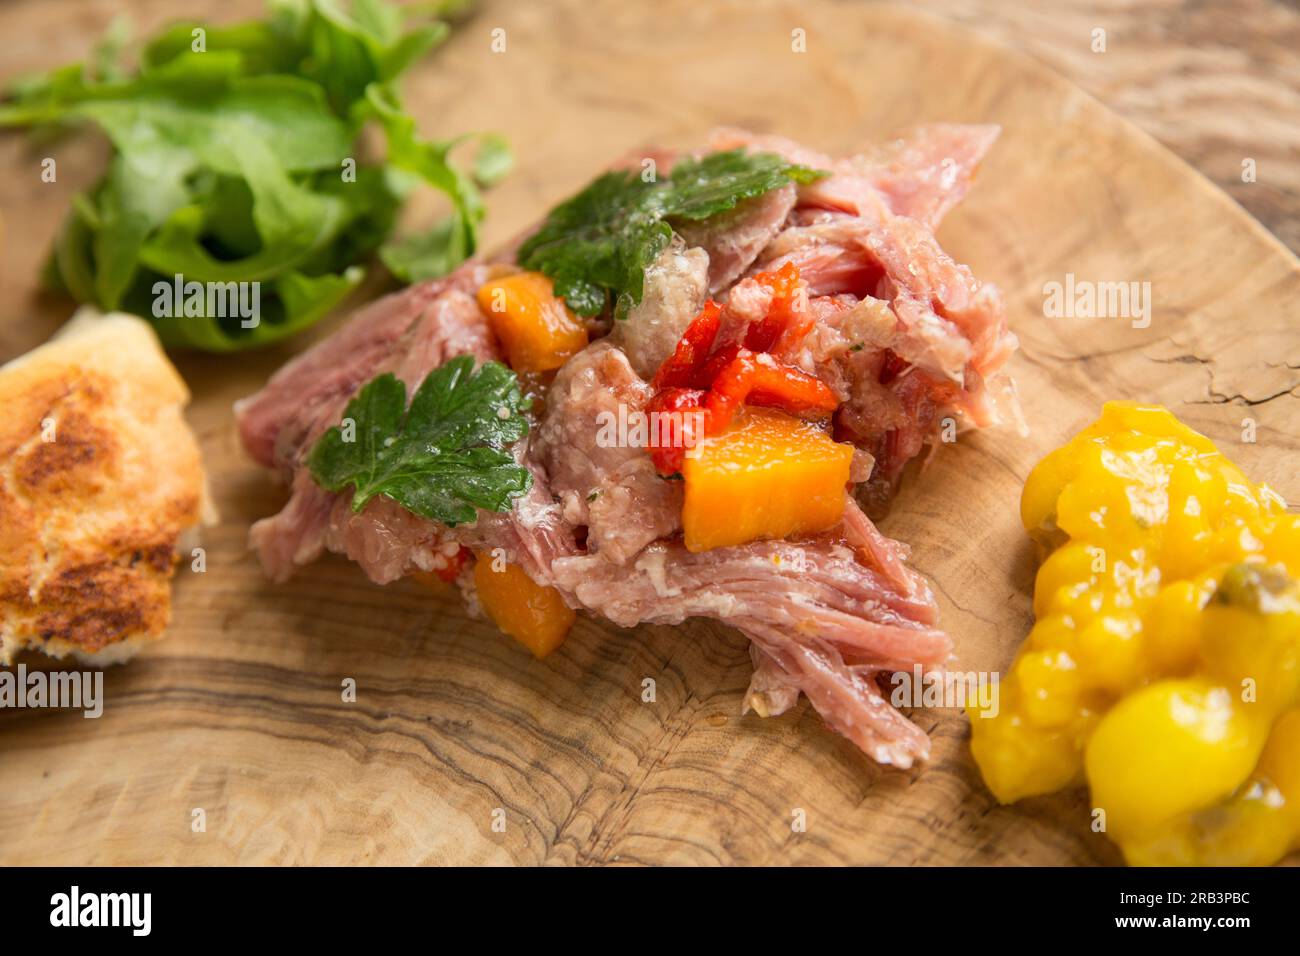 A home cooked British gammon shank that has been slow cooked in water, white wine vinegar, bay leaves, coriander seeds and black peppers to make a ter Stock Photo